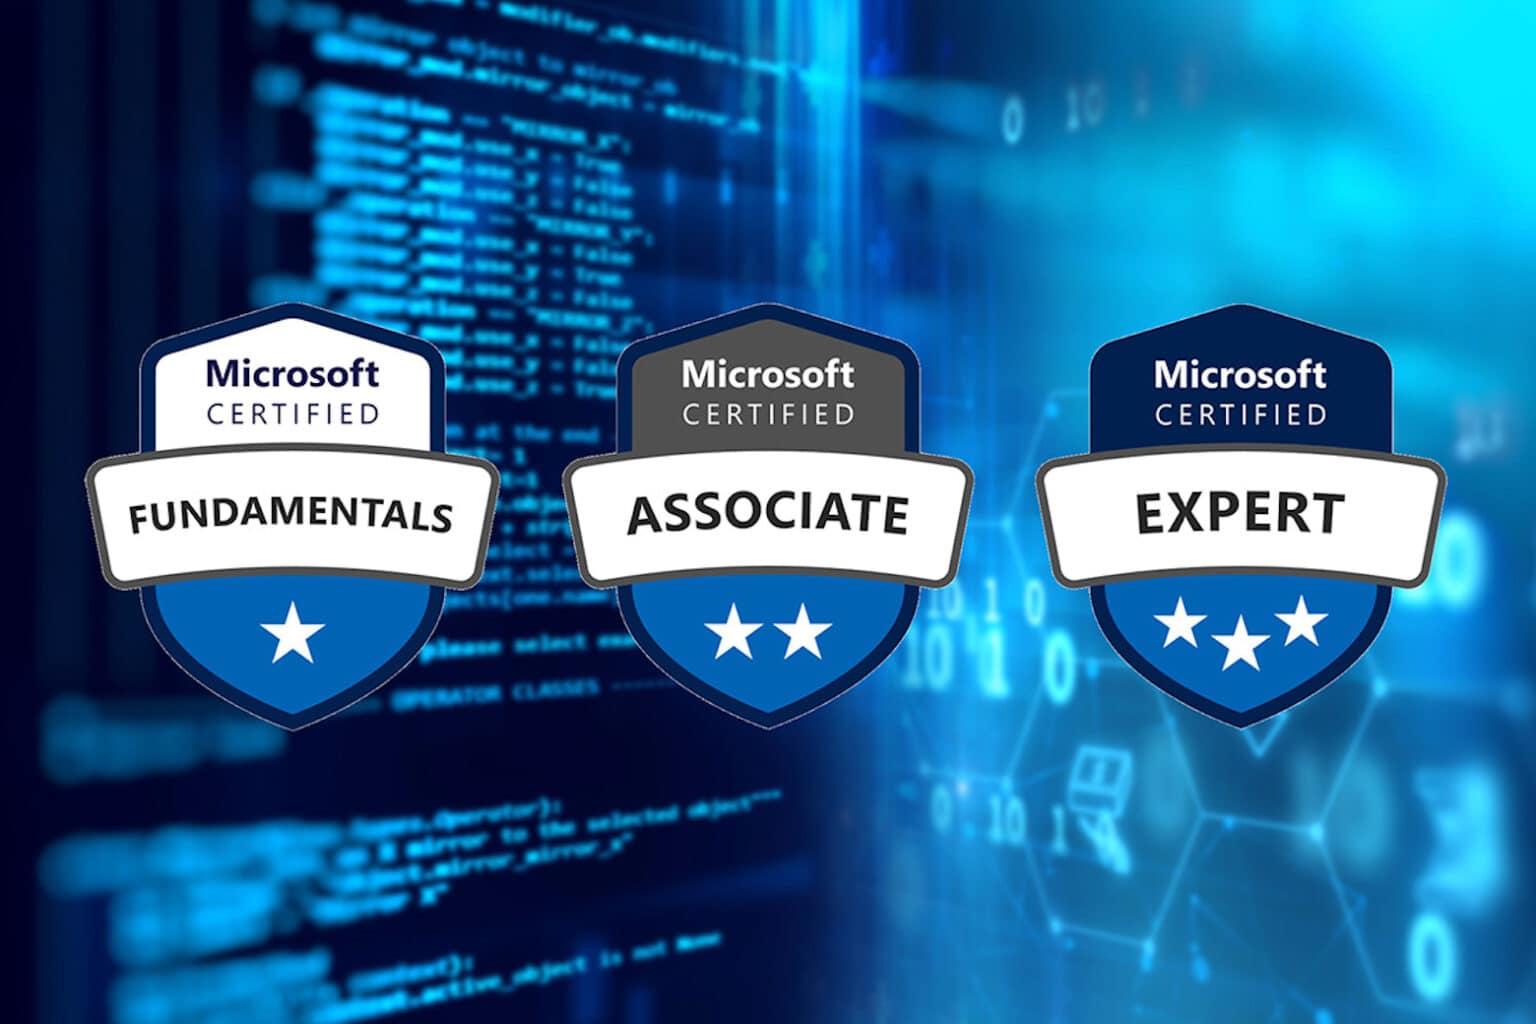 Study for your Microsoft Tech Certification with this $70 bundle.